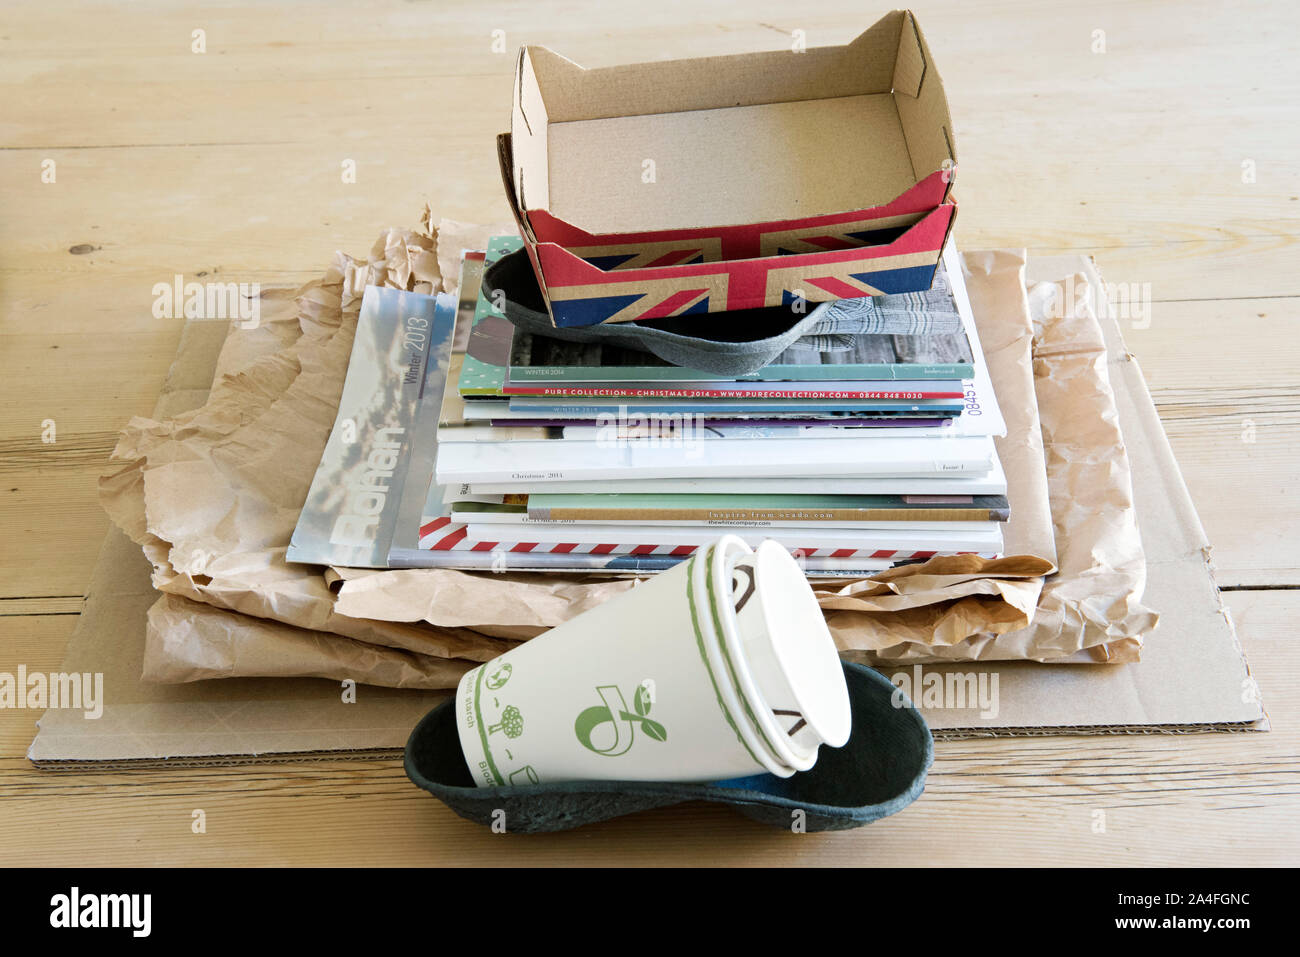 Recyclable Household items on kitchen table for recycling including, paper, cardboard fruit holders, mugs and old catalogues. Stock Photo